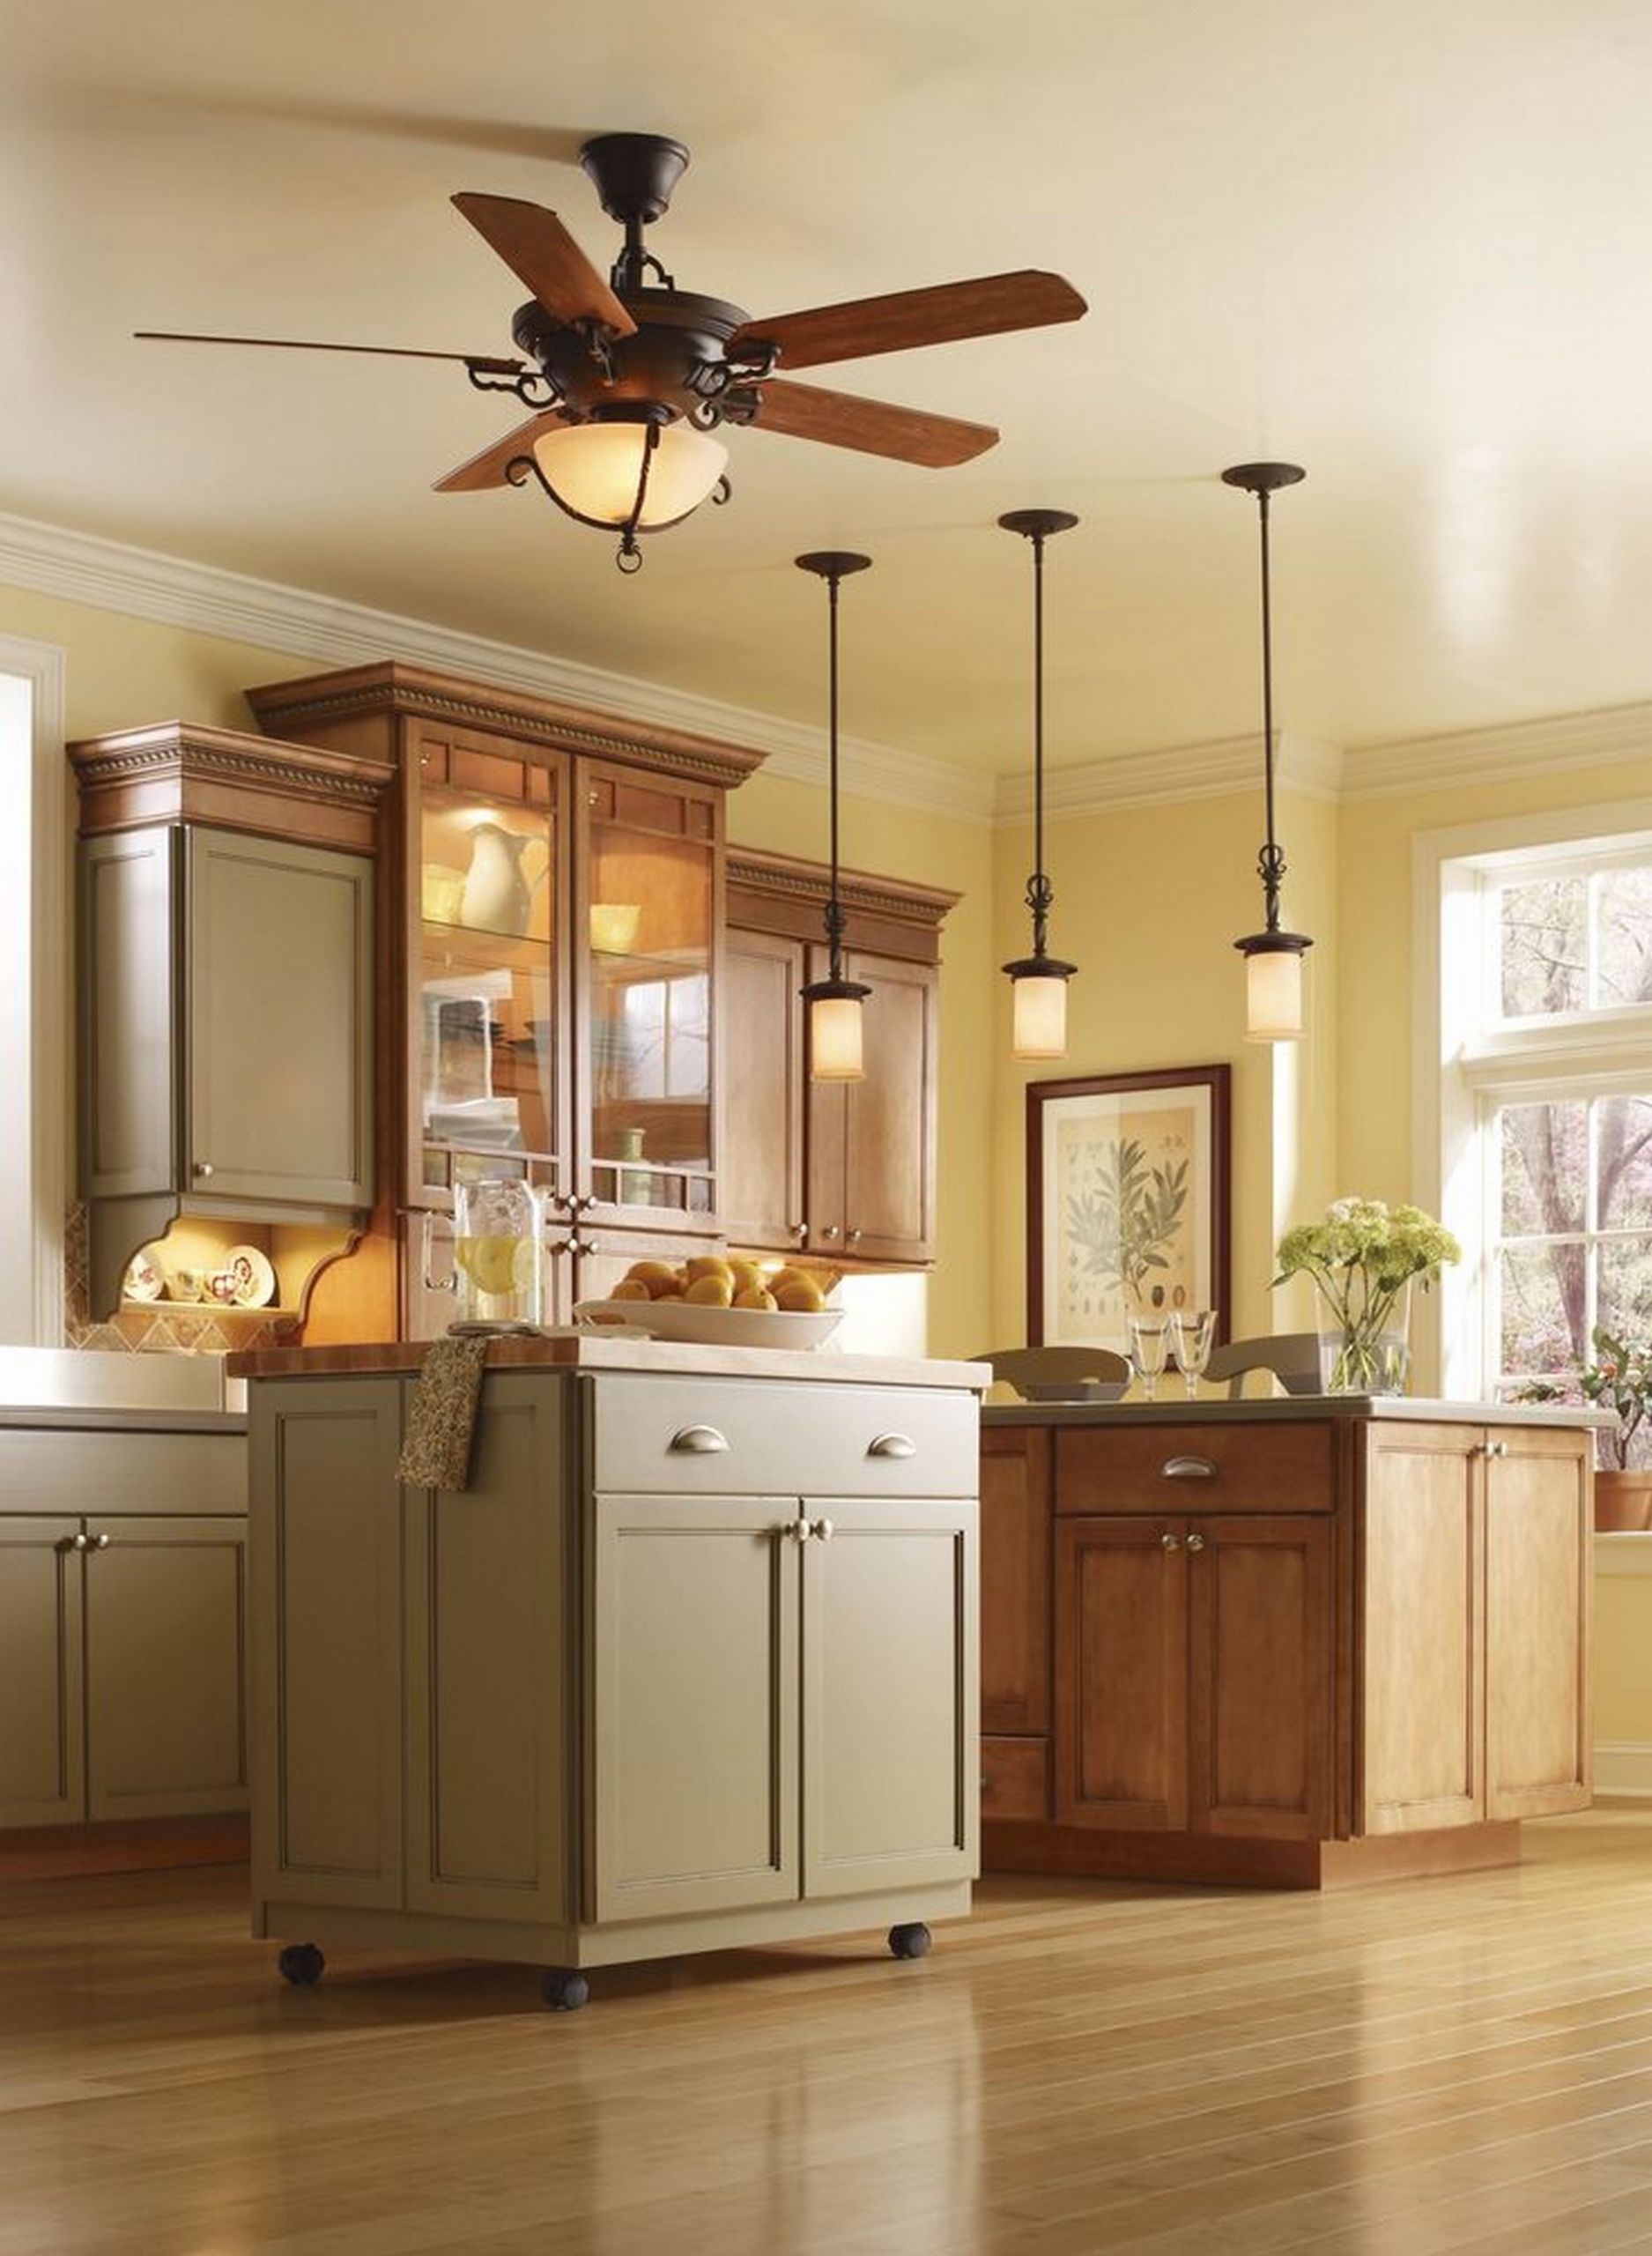 Kitchen Fans With Lights
 10 Tips To Help You Get the Right Ceiling fan for kitchen